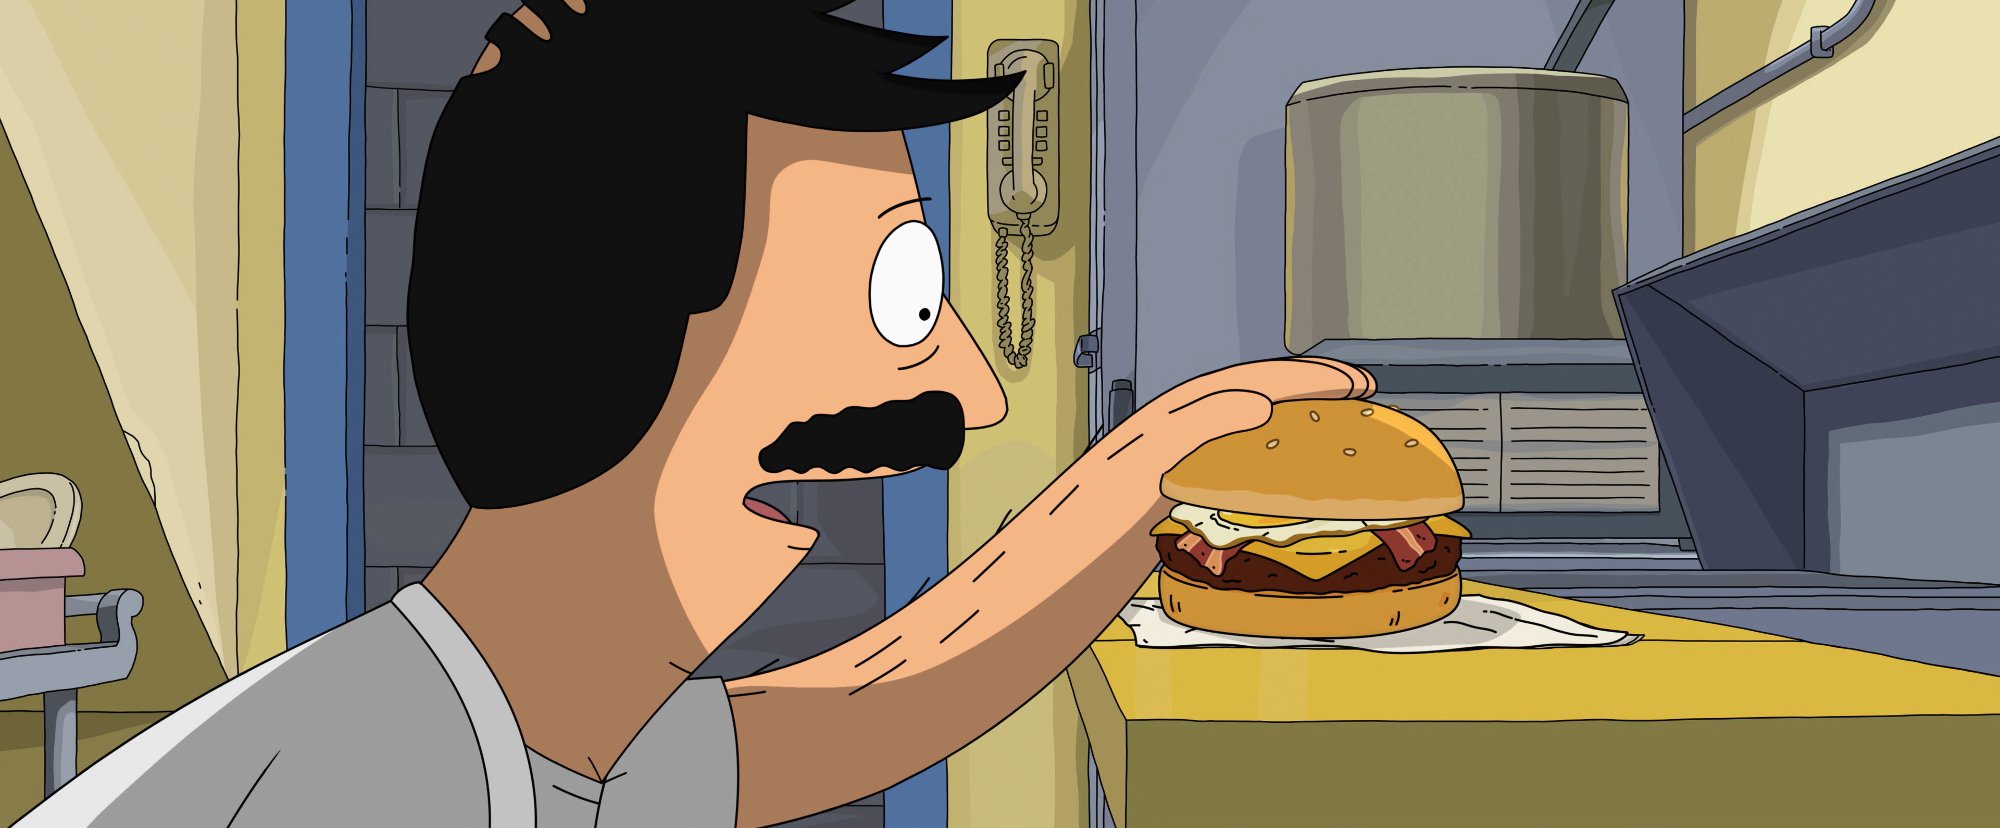 'The Bob's Burgers Movie' Bob Belcher (voiced by H. Jon Benjamin) looking at a burger and resting his hand on it